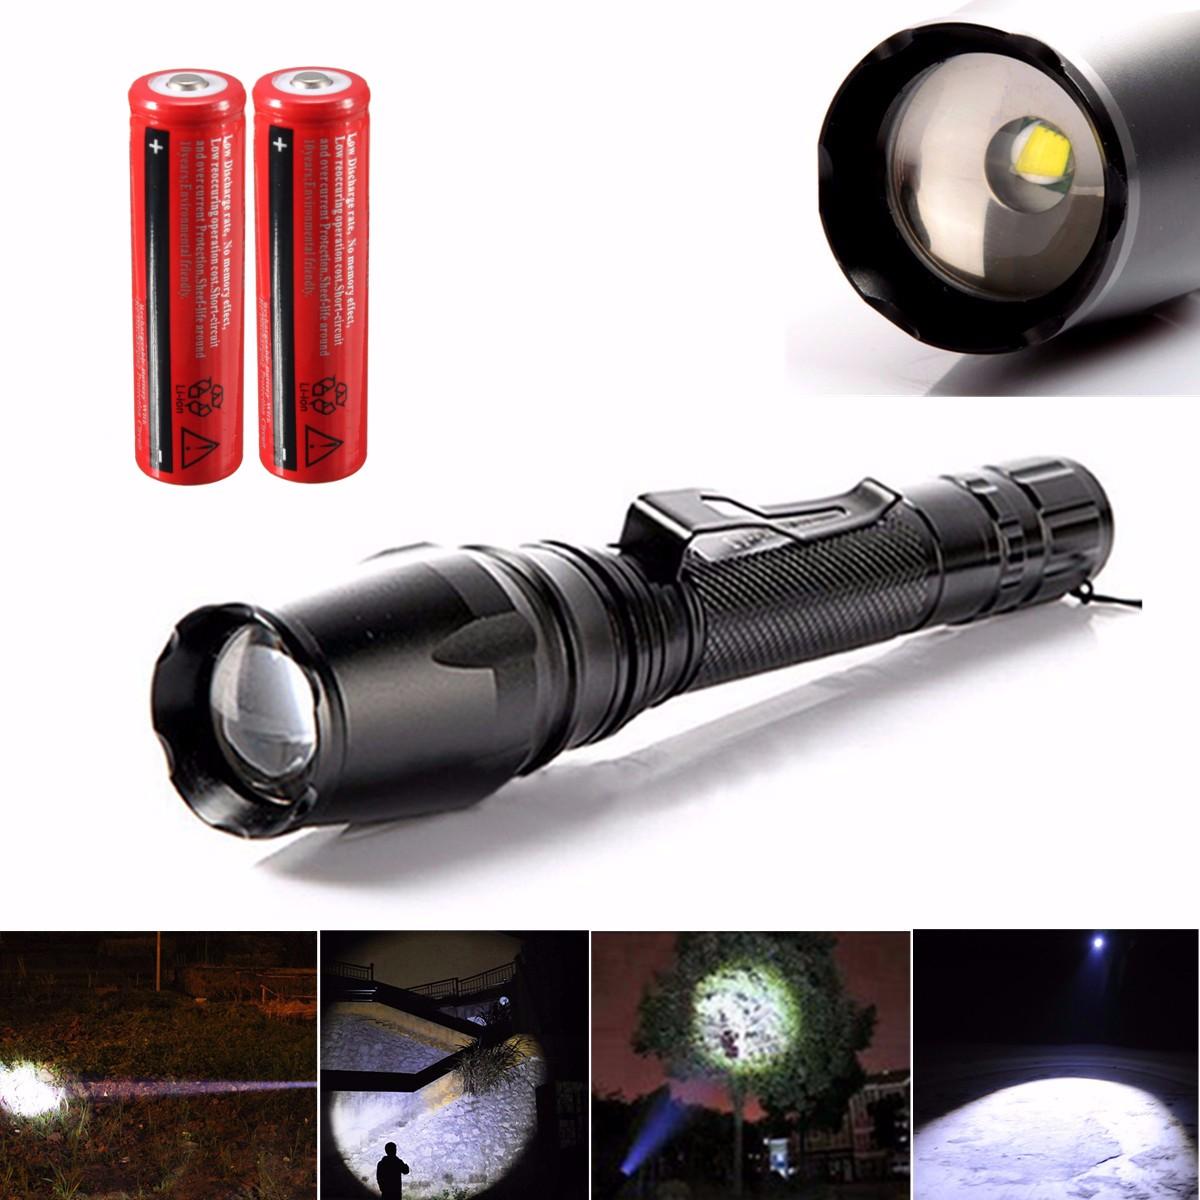 

1400LM Elfeland Tactical Zoomable 5Mode T6 LED Torch Flashlight +18650 Battery